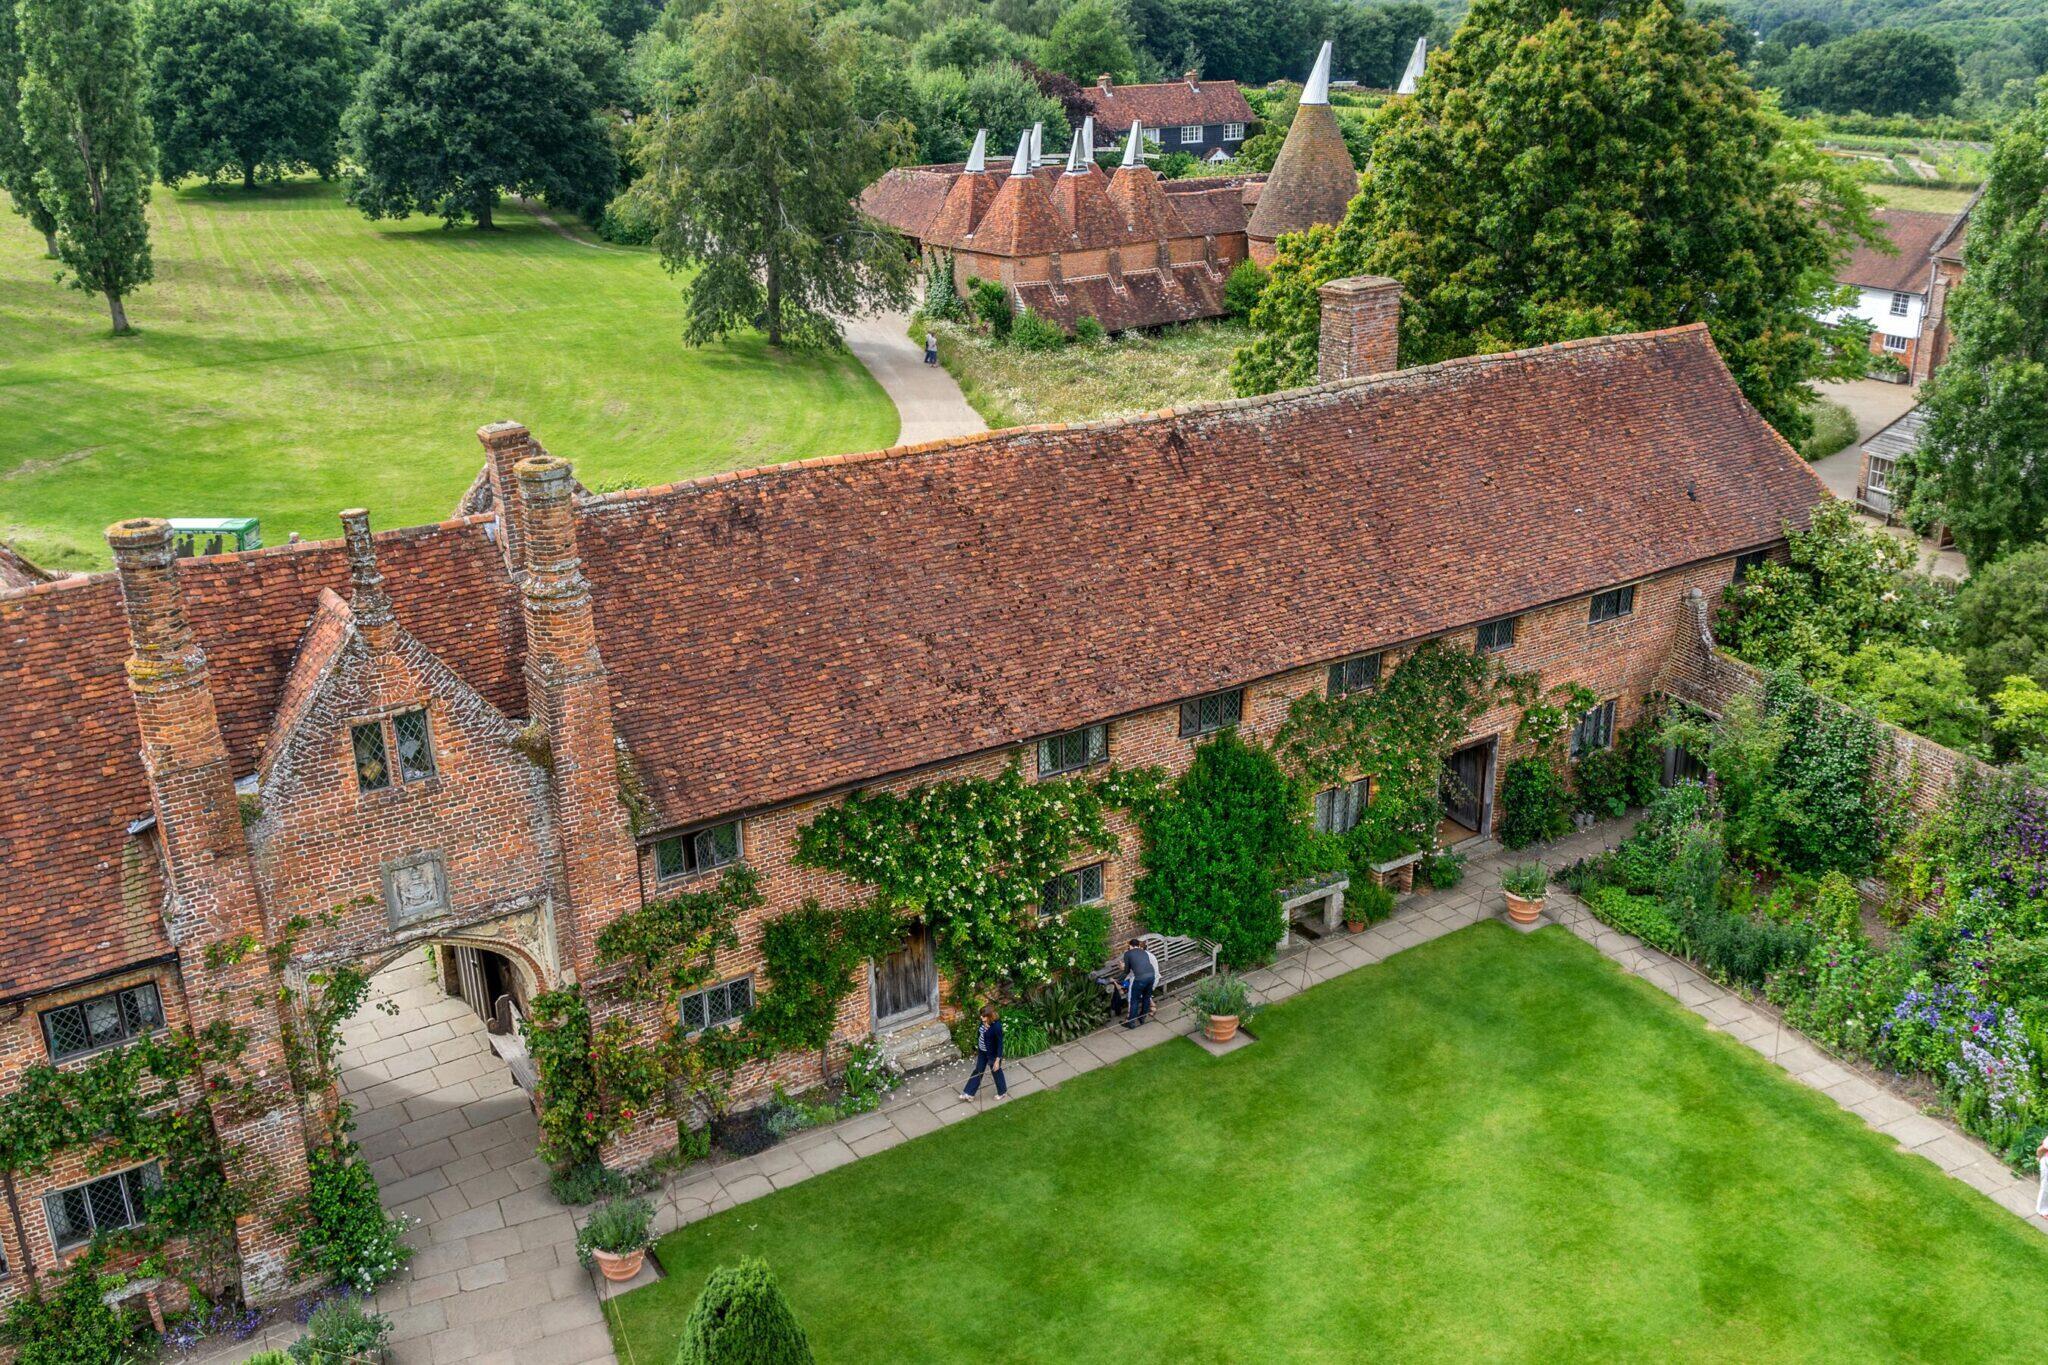 <a href='https://www.fodors.com/world/europe/england/experiences/news/photos/best-gardens-to-visit-in-england-and-scotland#'>From &quot;10 Best Gardens to Visit in the United Kingdom: Sissinghurst Castle&quot;</a>